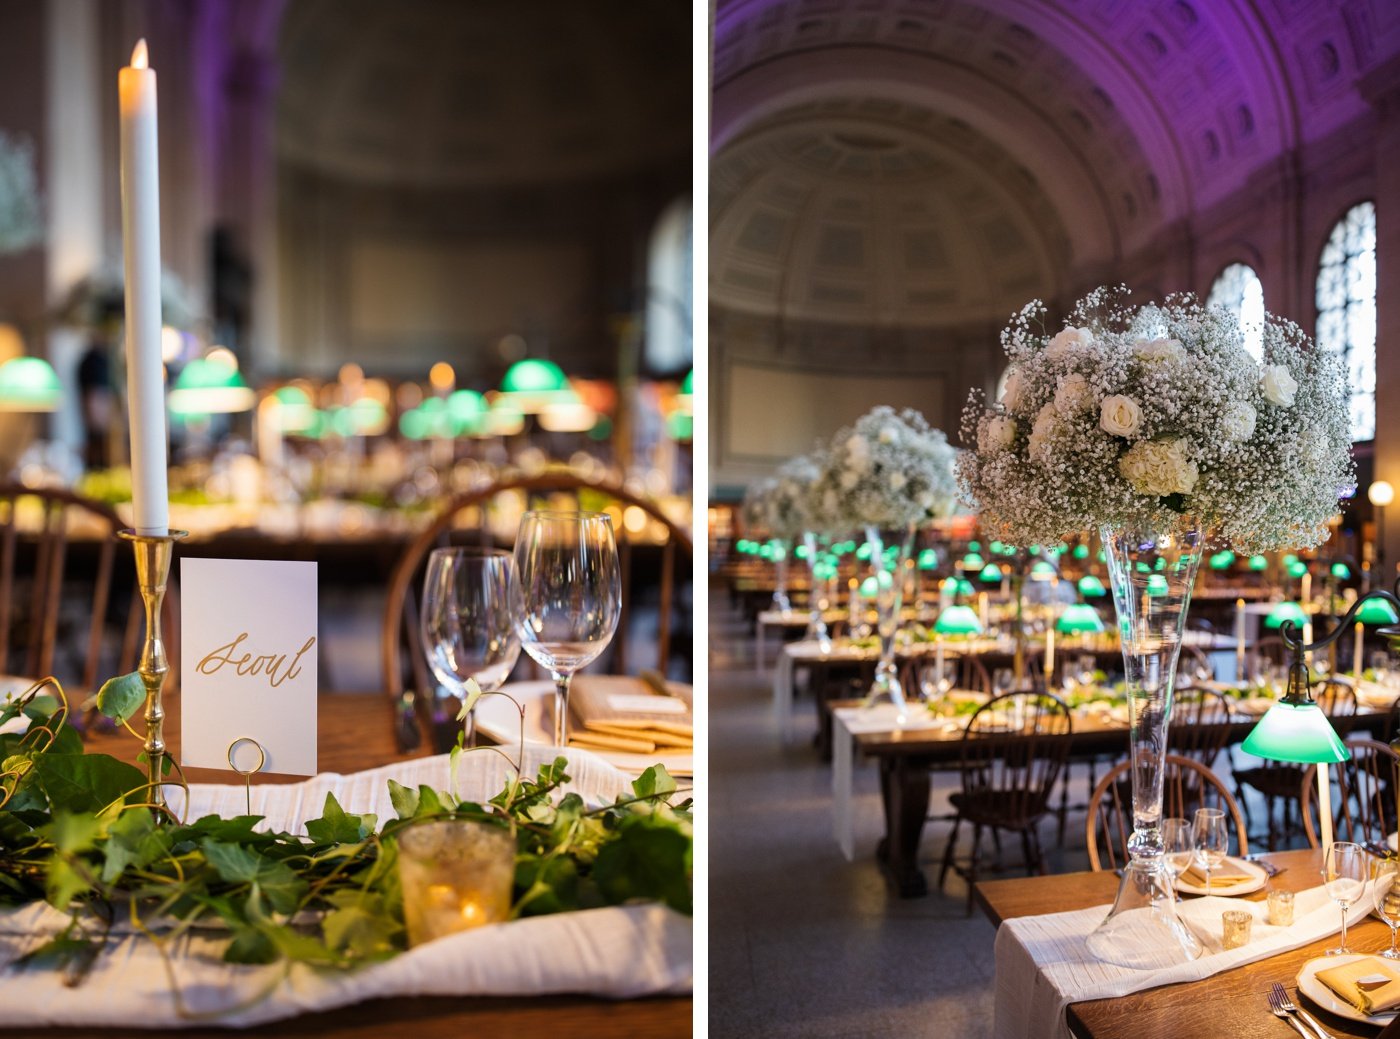 Tall glass vases with white roses and baby's breath for a wedding reception at Boston Public Library